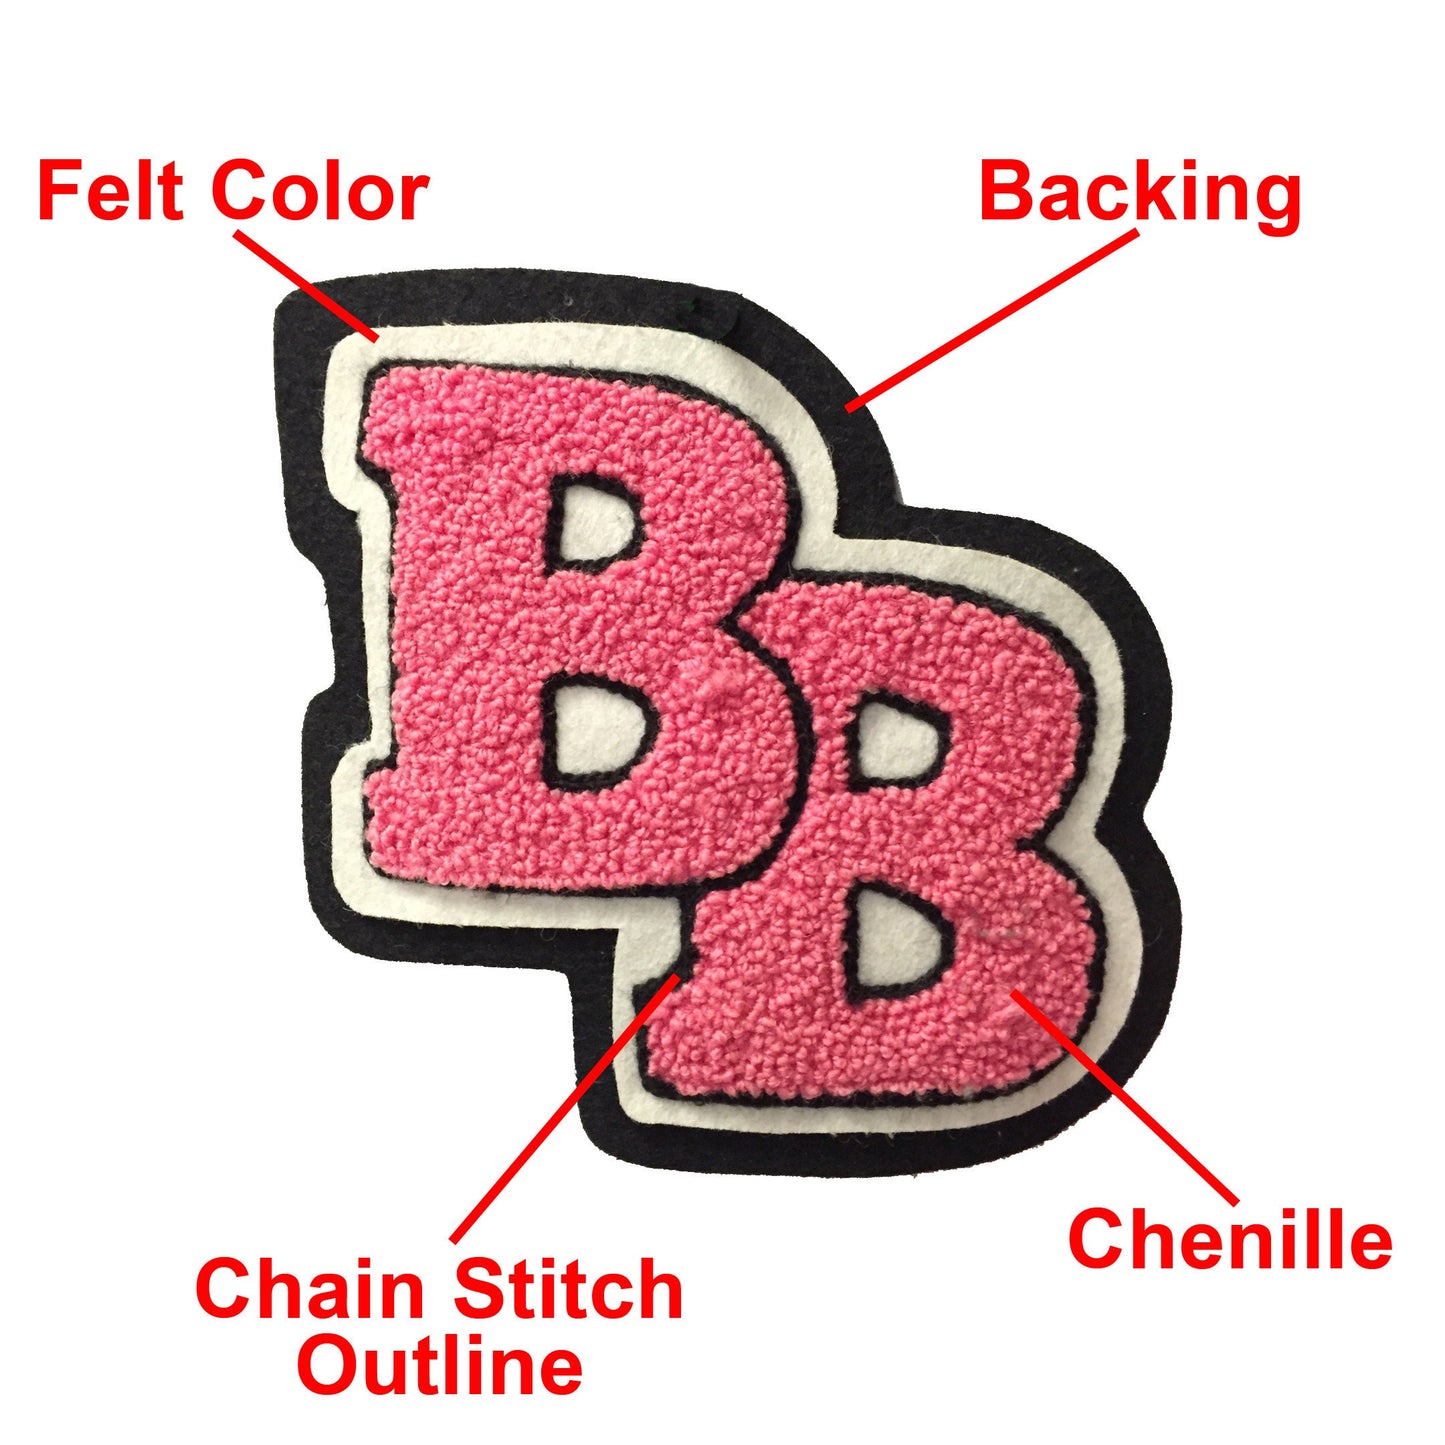 High School or Varsity Chenille letters custom made to your color specifications